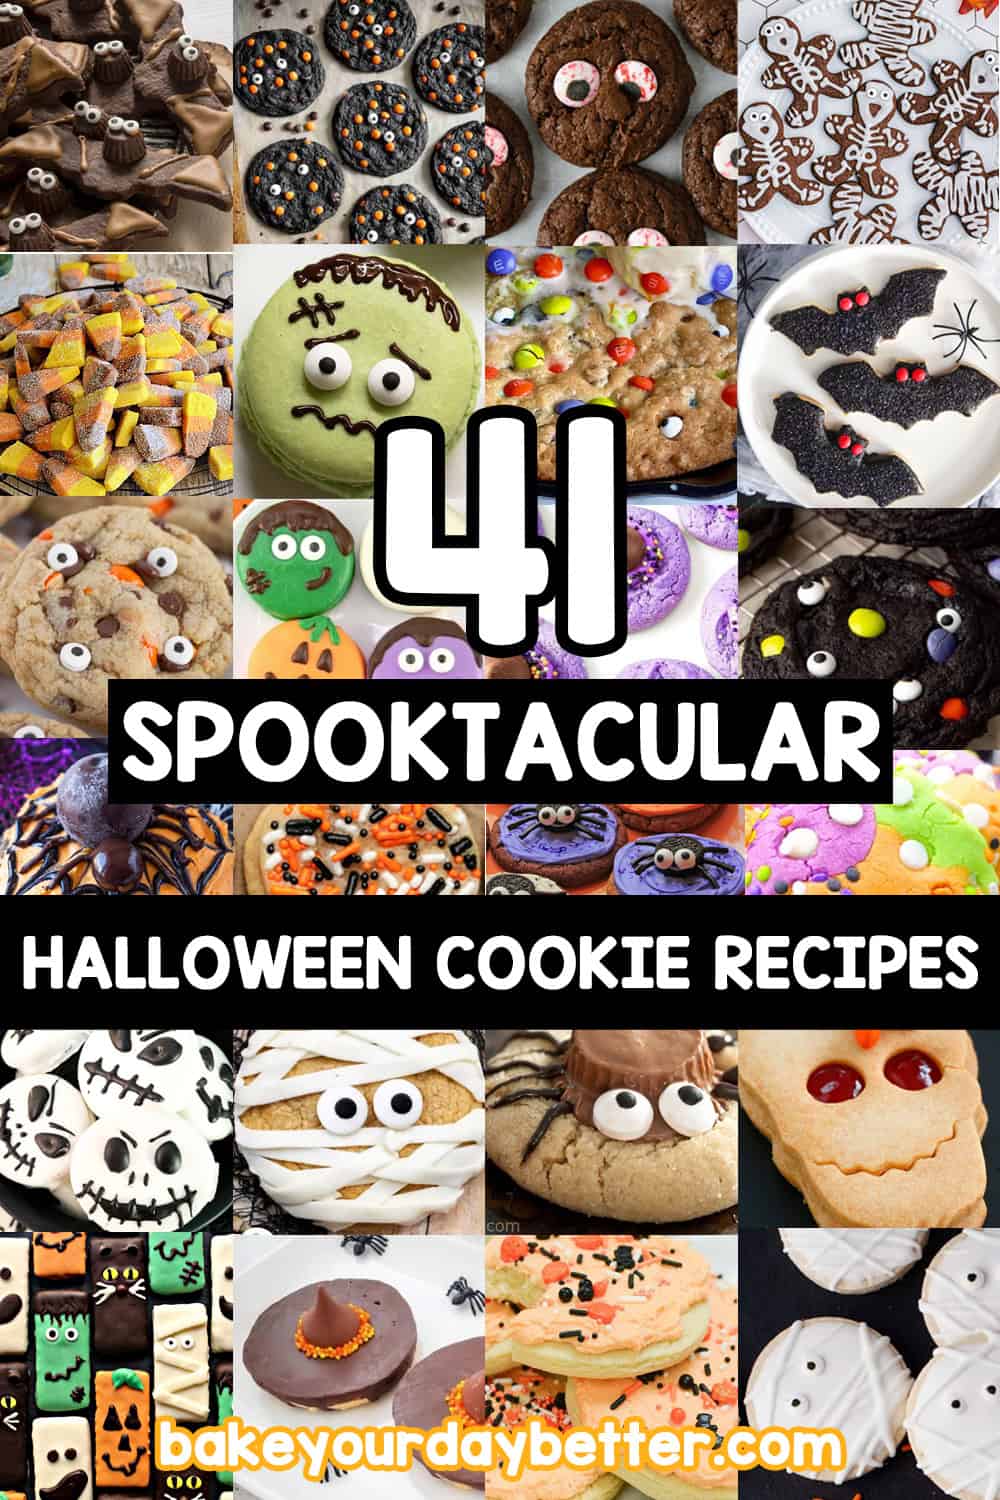 pictures of halloween cookies with text overlay that says: 41 spooktacular halloween cookie recipes